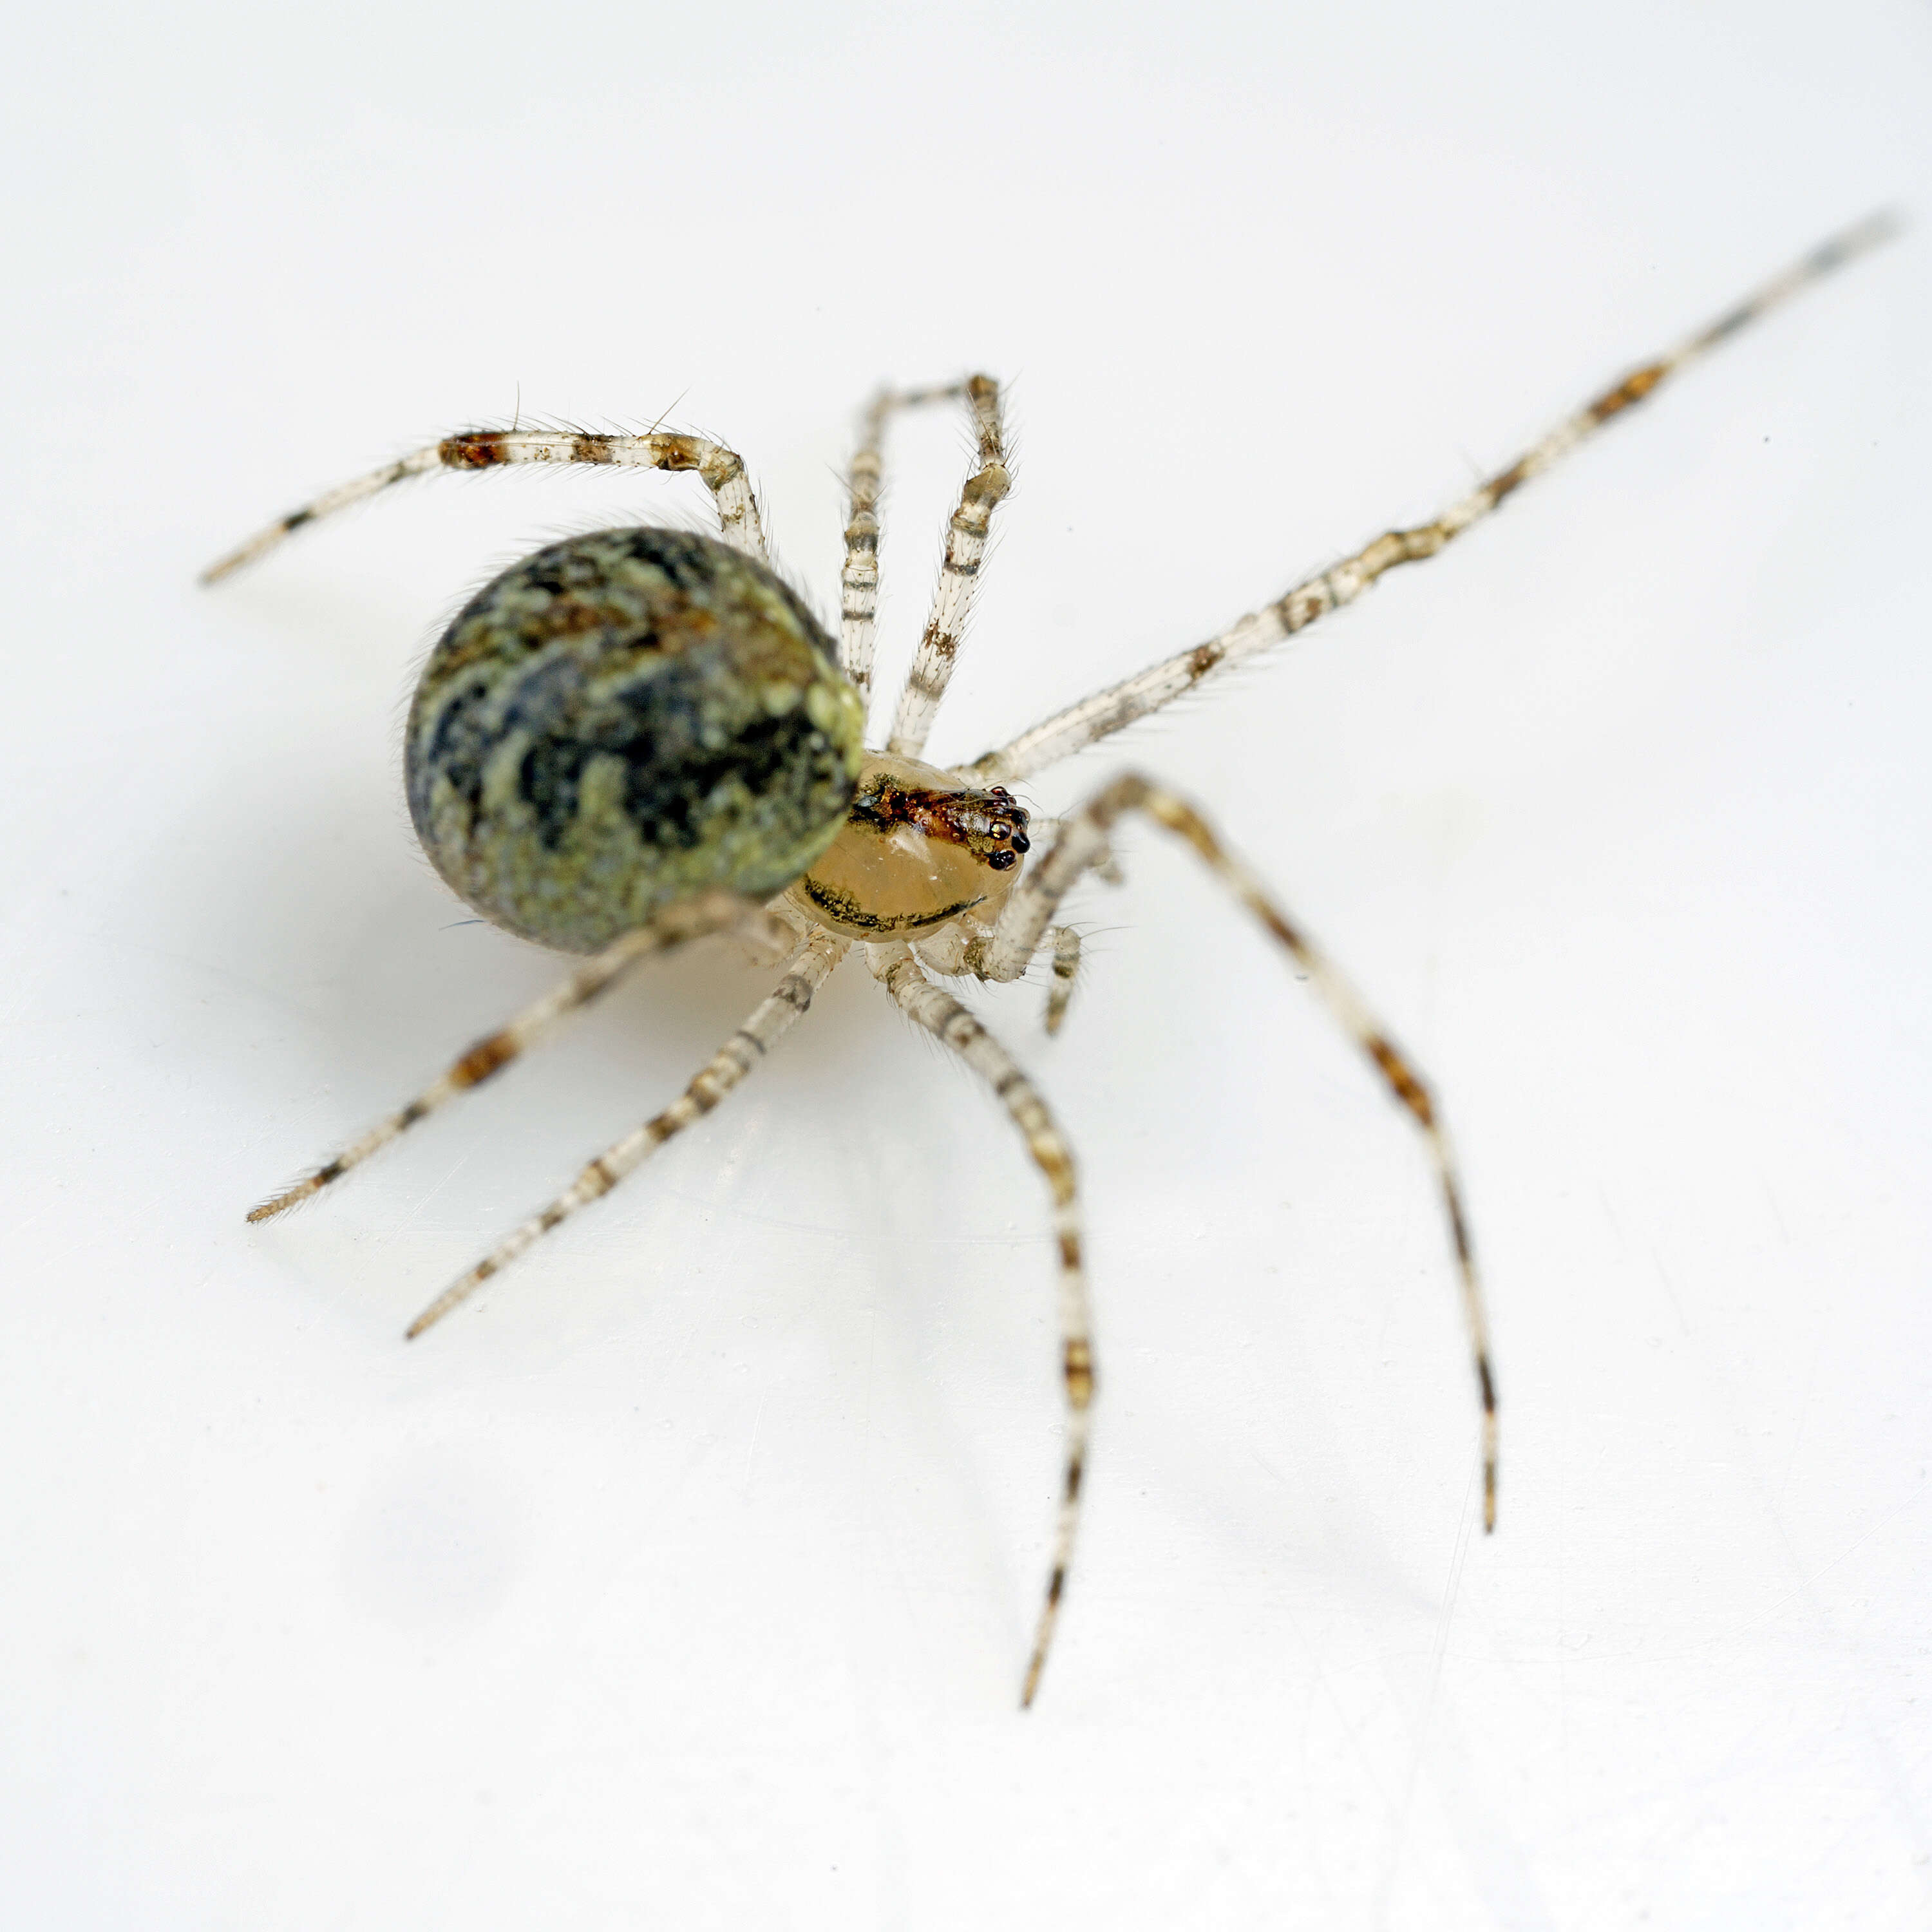 Image of Theridion varians Hahn 1833